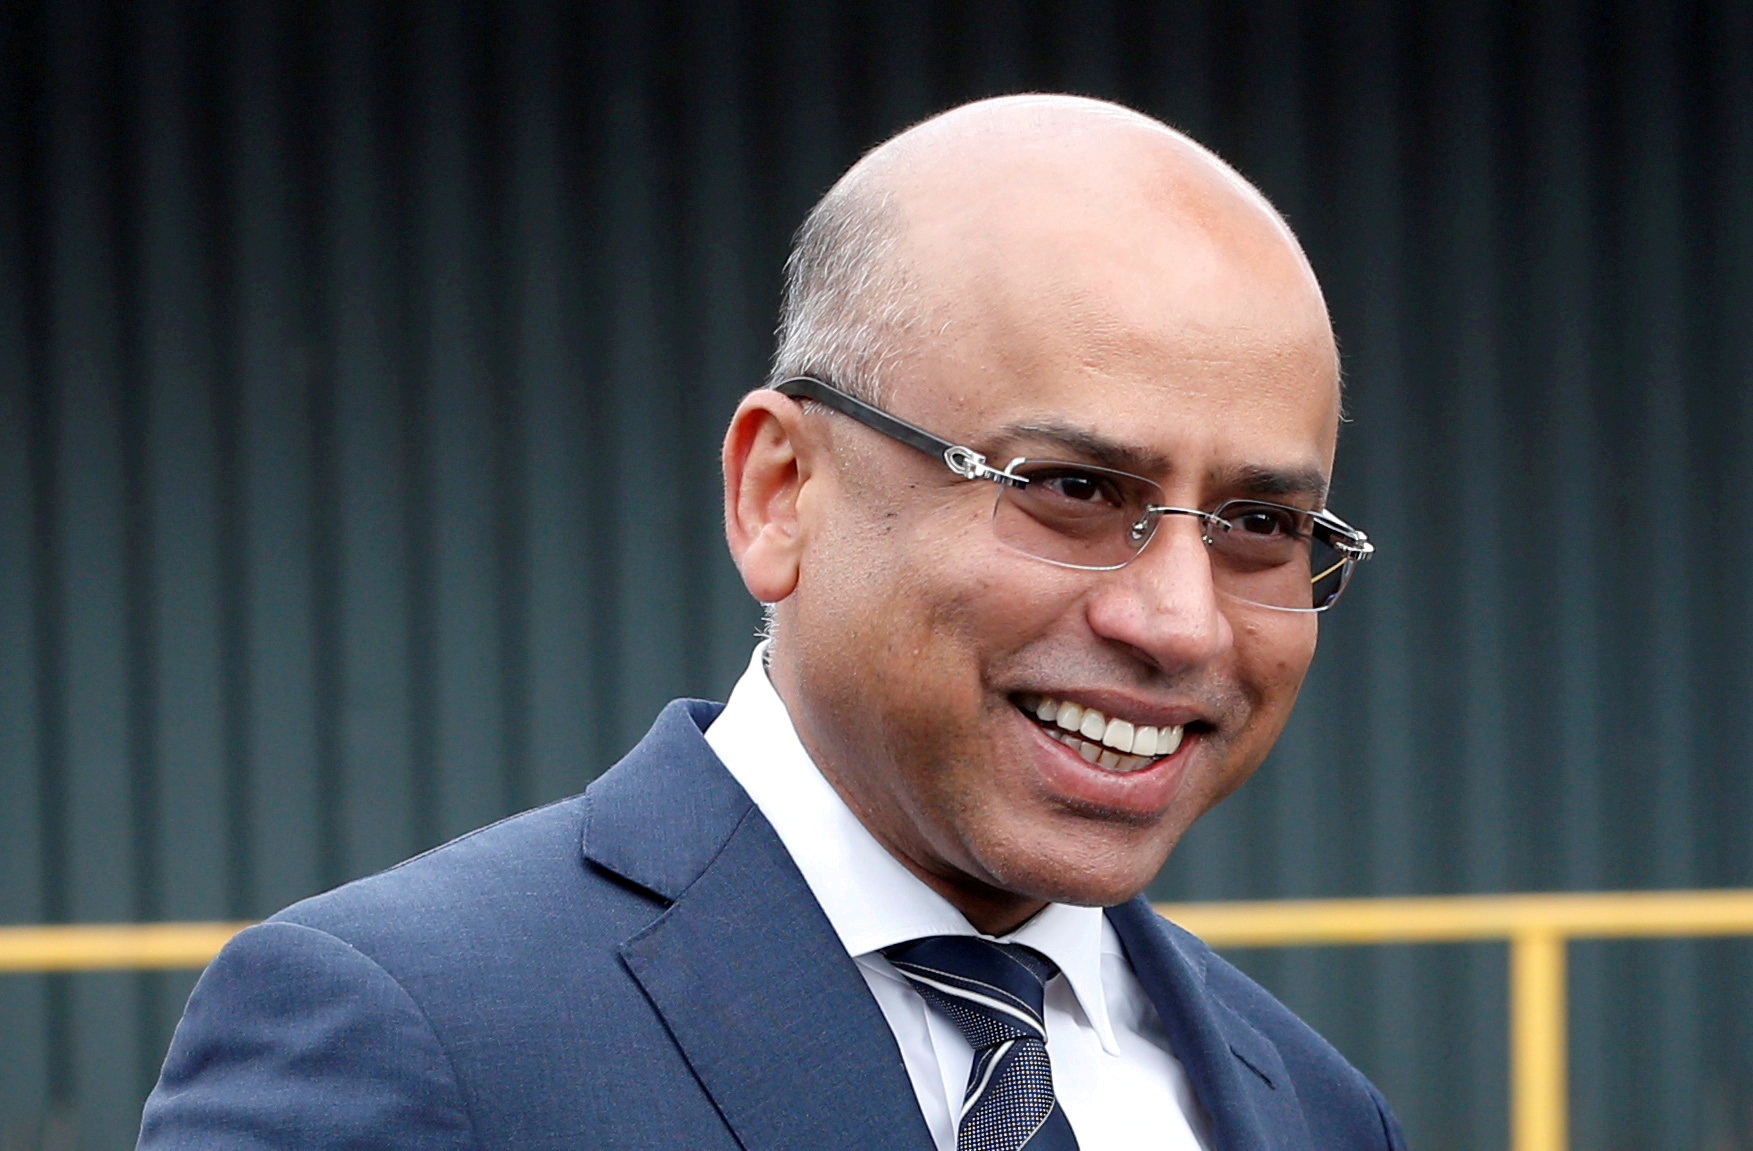 Liberty Steel's Sanjeev Gupta smiles outside the company's Liberty Steel processing mill in Dalzell, Scotland, Britain April 8, 2016. REUTERS/Russell Cheyne